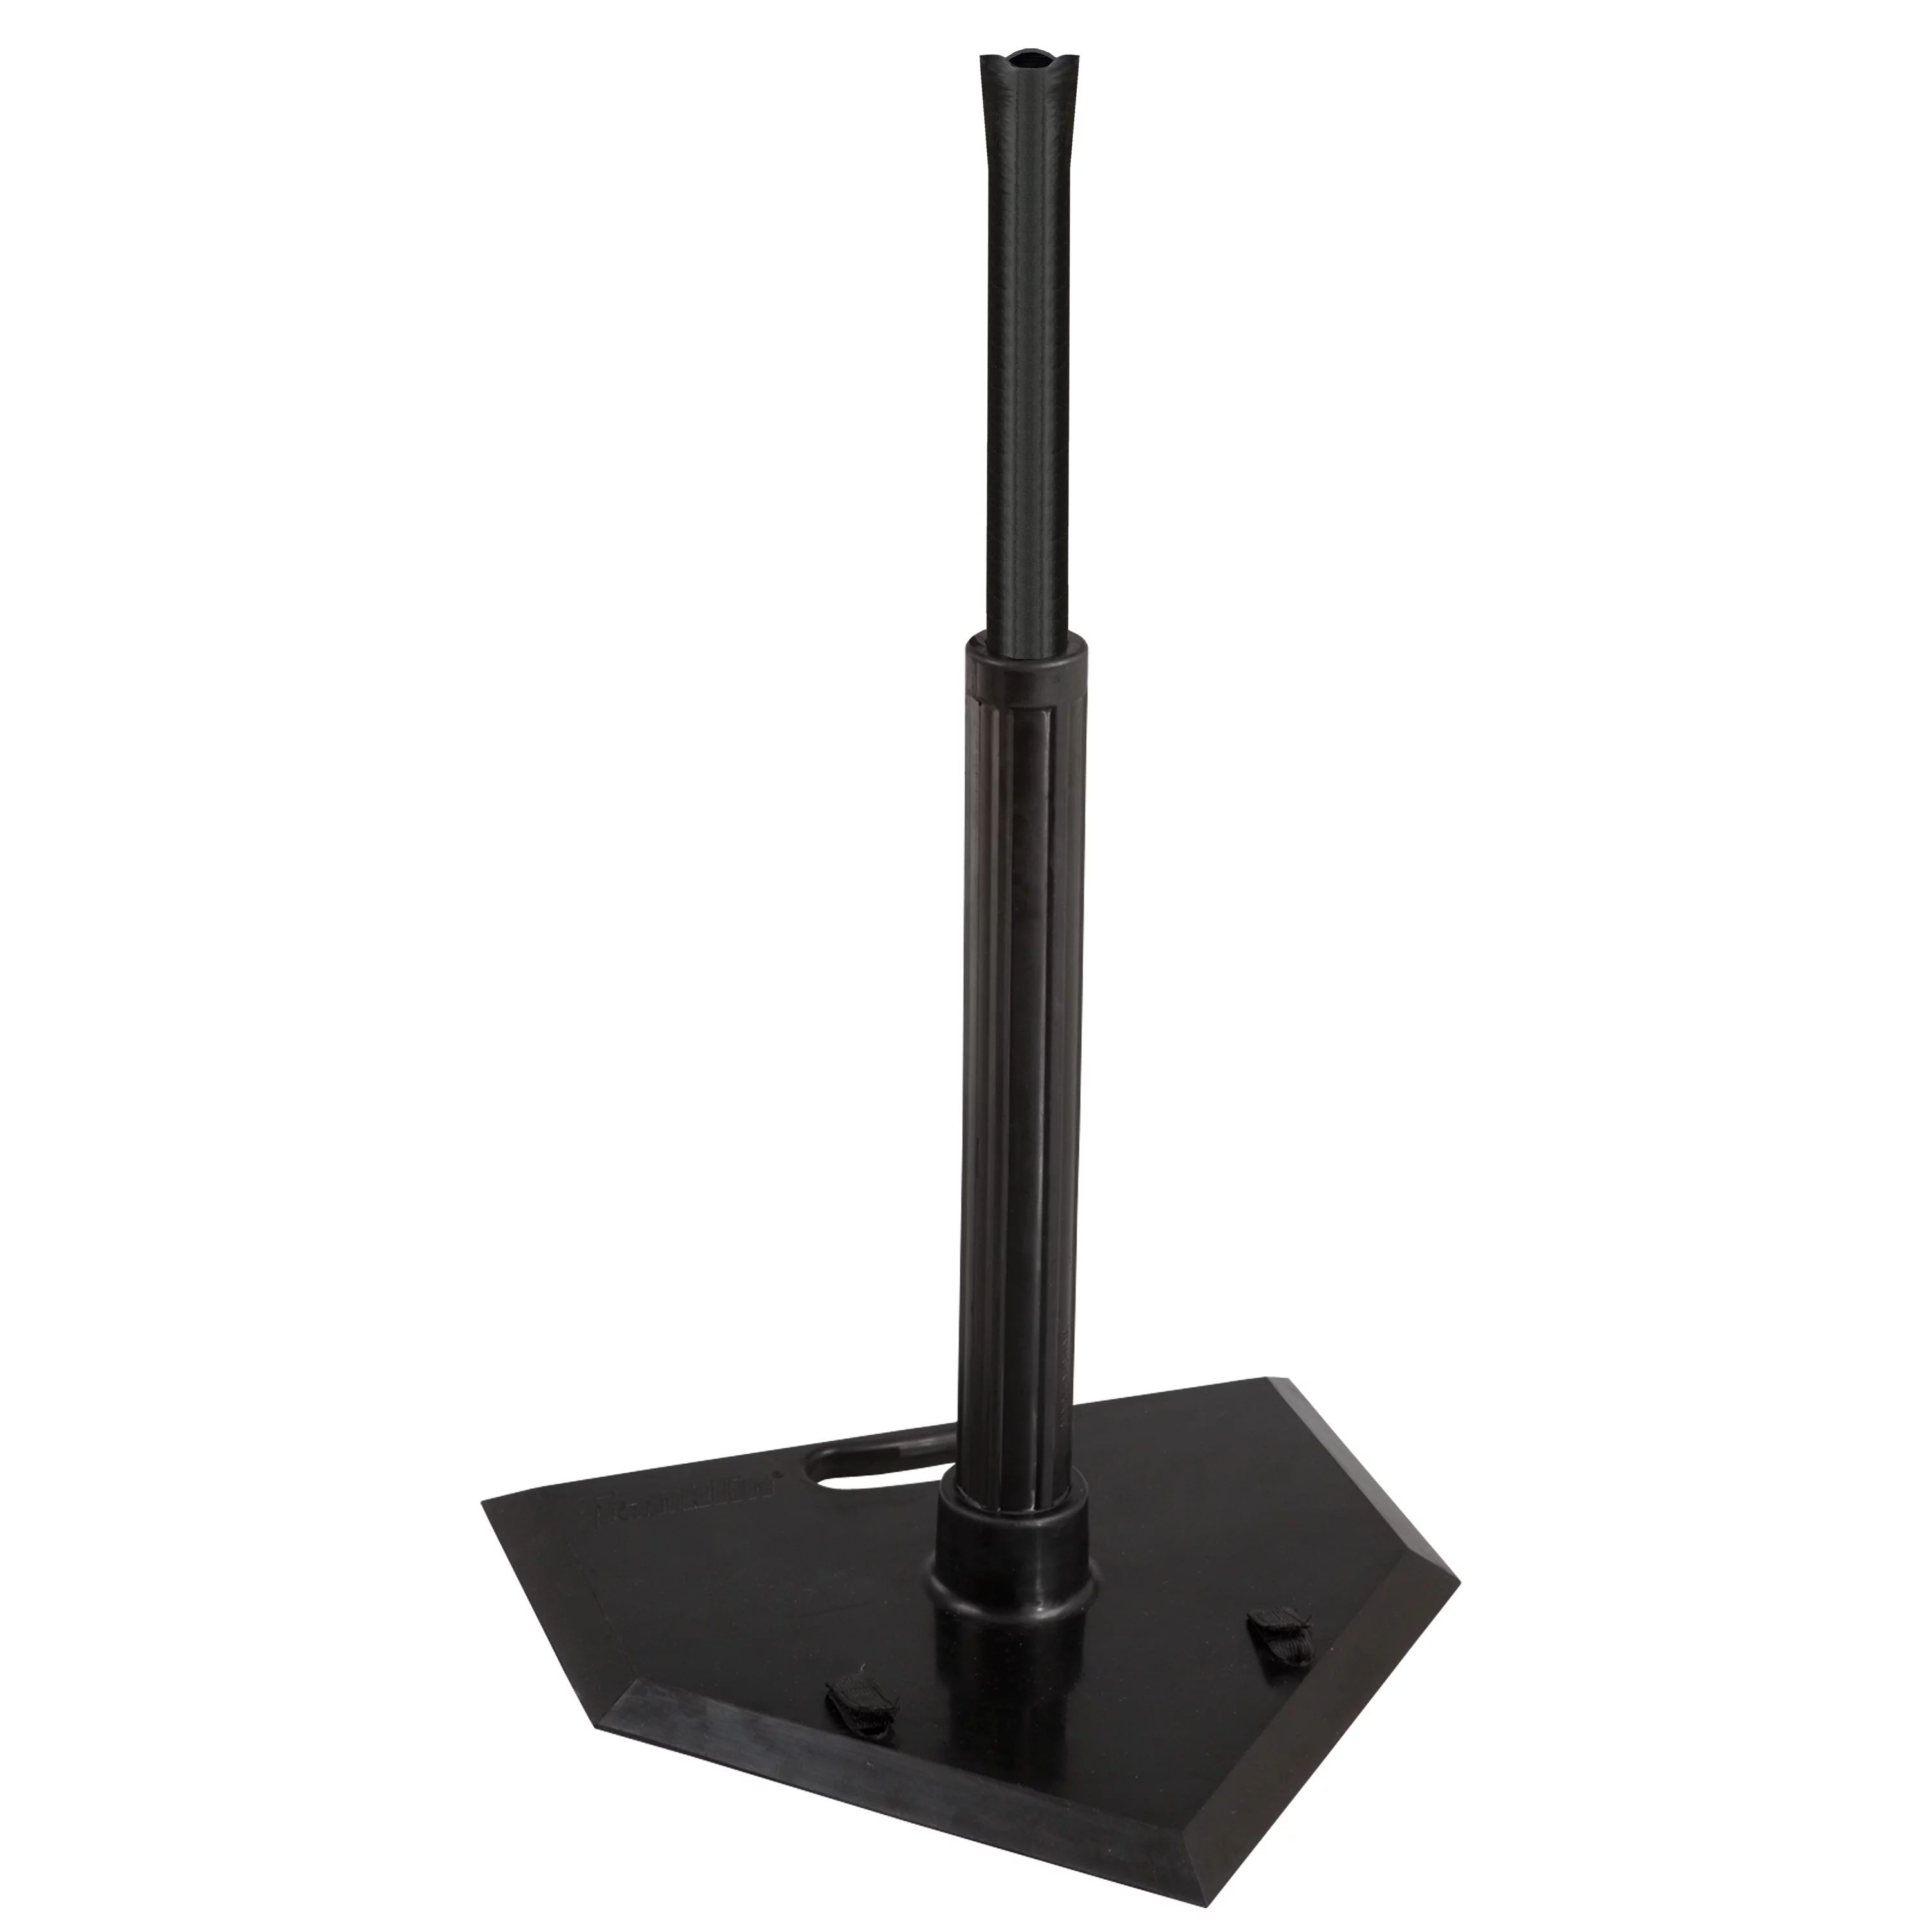 Franklin Sports Batting Tee - One Position Rubber Batting Tee - Baseball and Softball Hitting Tee... | Walmart (US)